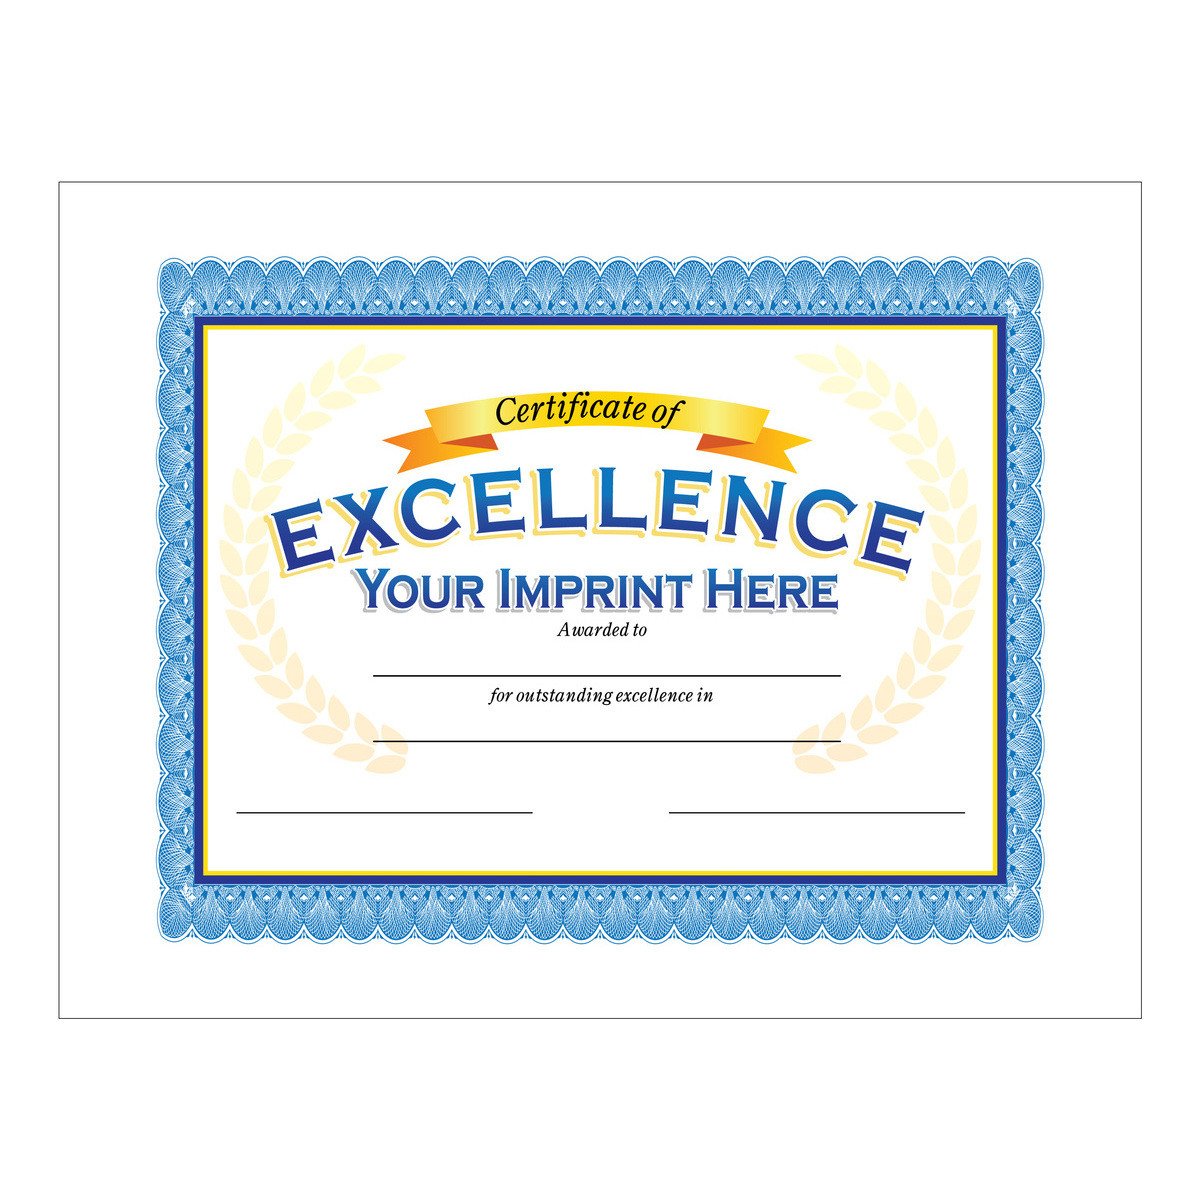 Custom 8.5" x 11" Certificate - Certificate of Excellence